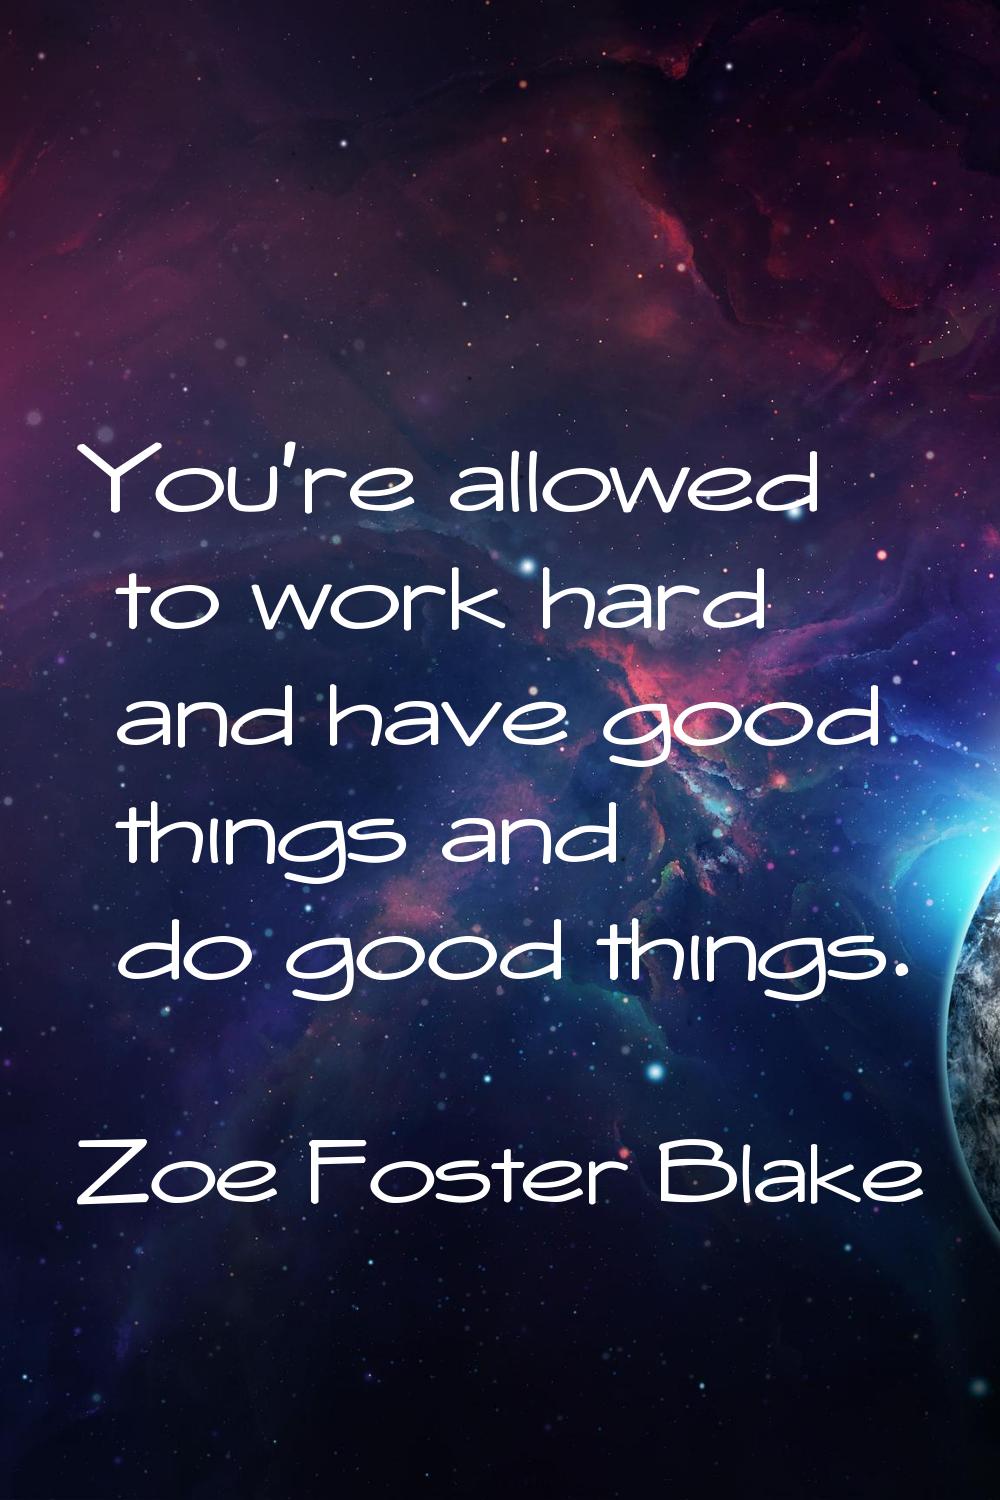 You're allowed to work hard and have good things and do good things.